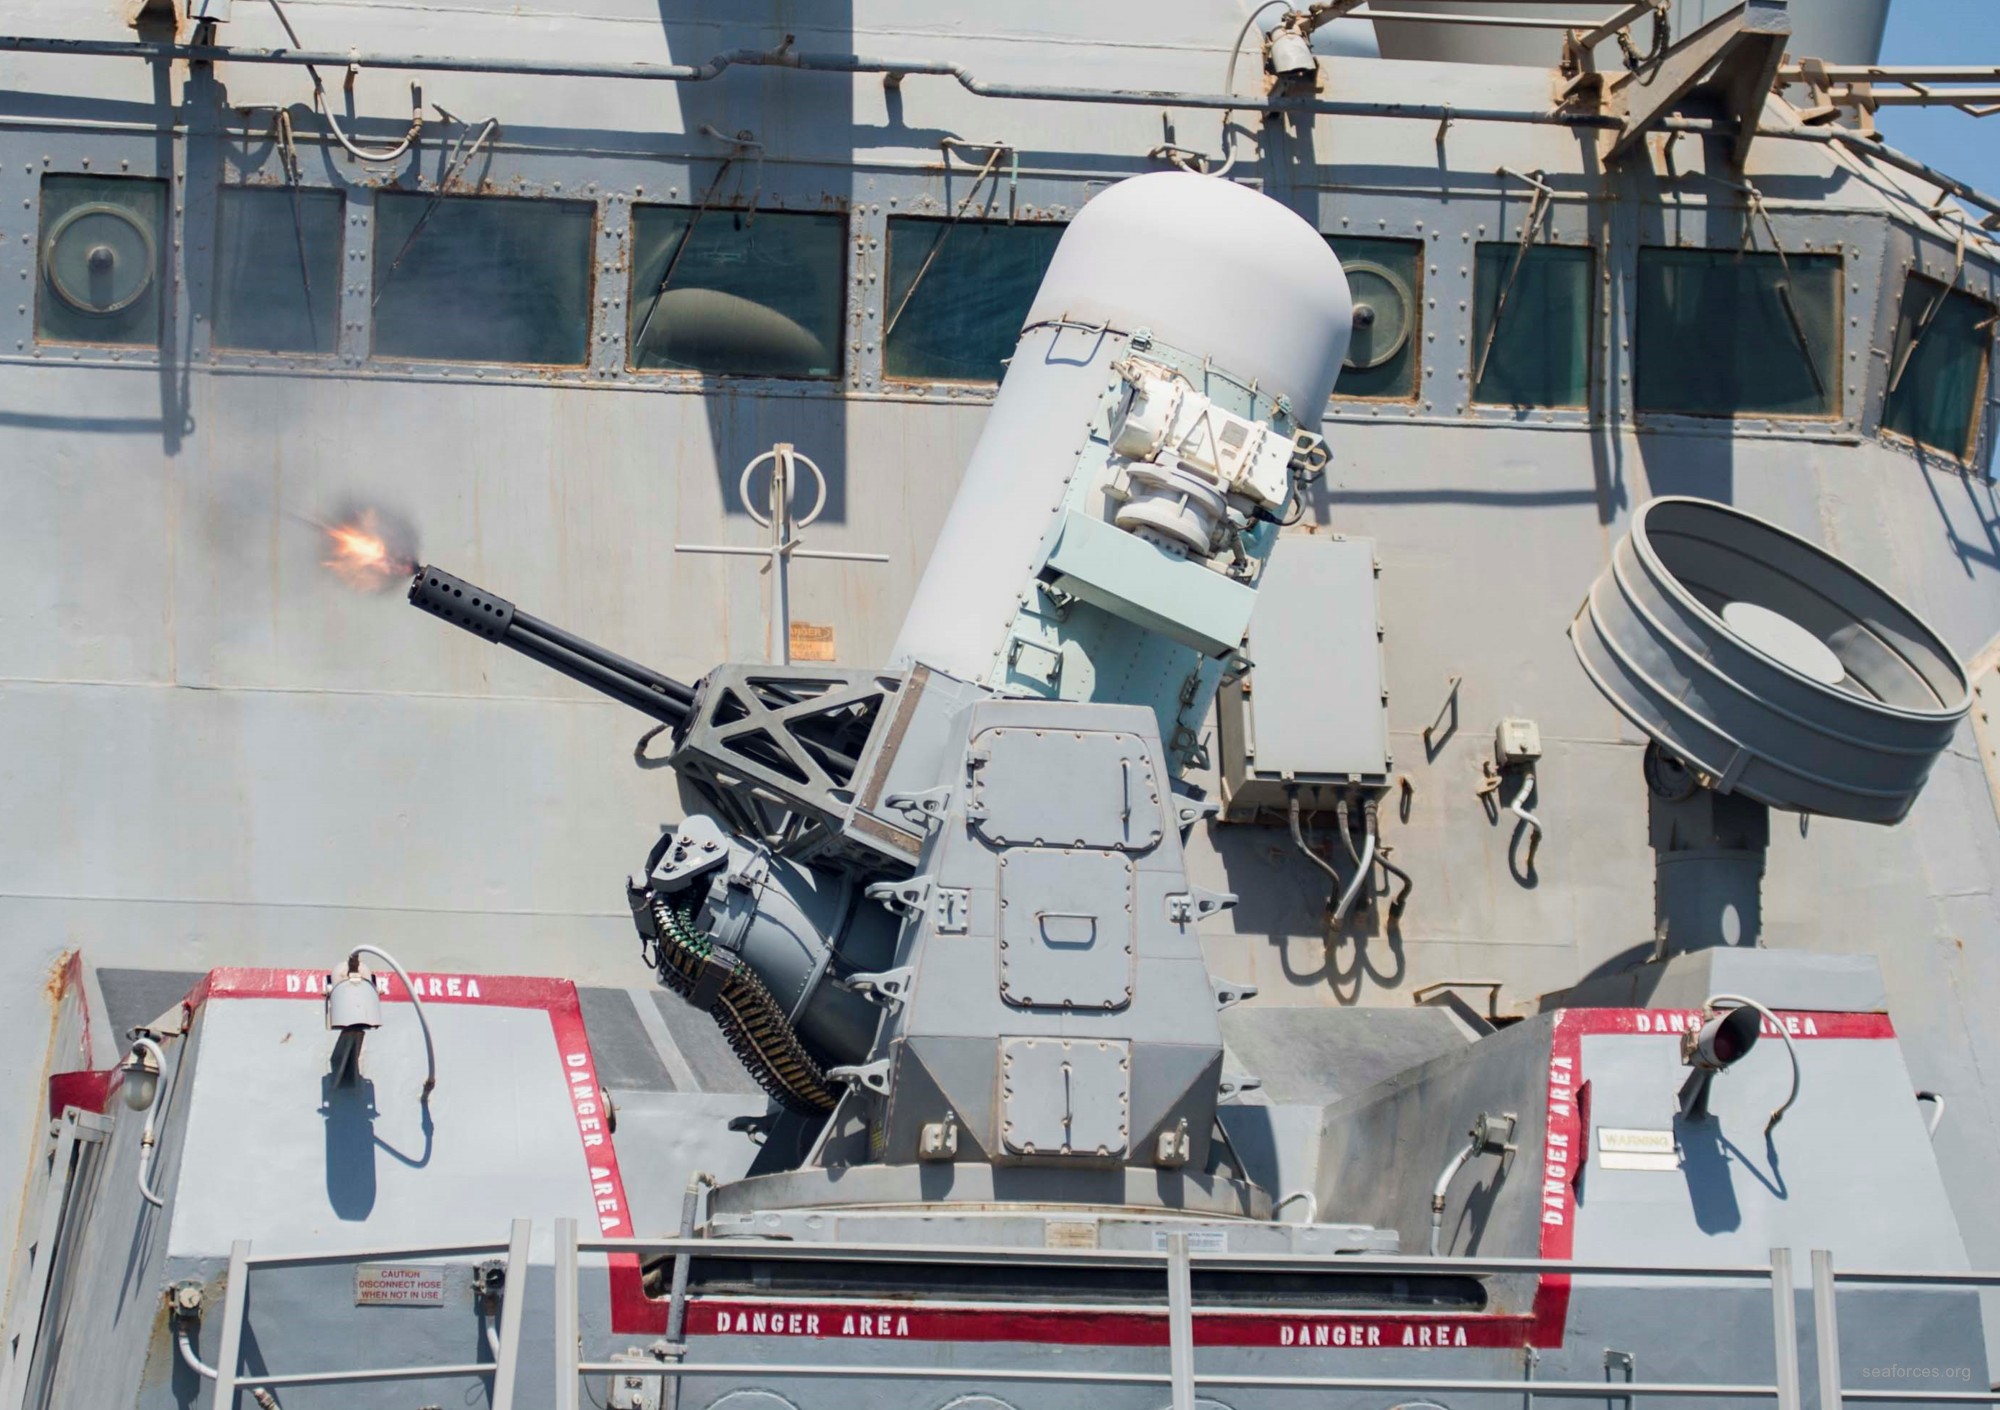 ddg-55 uss stout guided missile destroyer us navy 12 mk-15 phalanx ciws